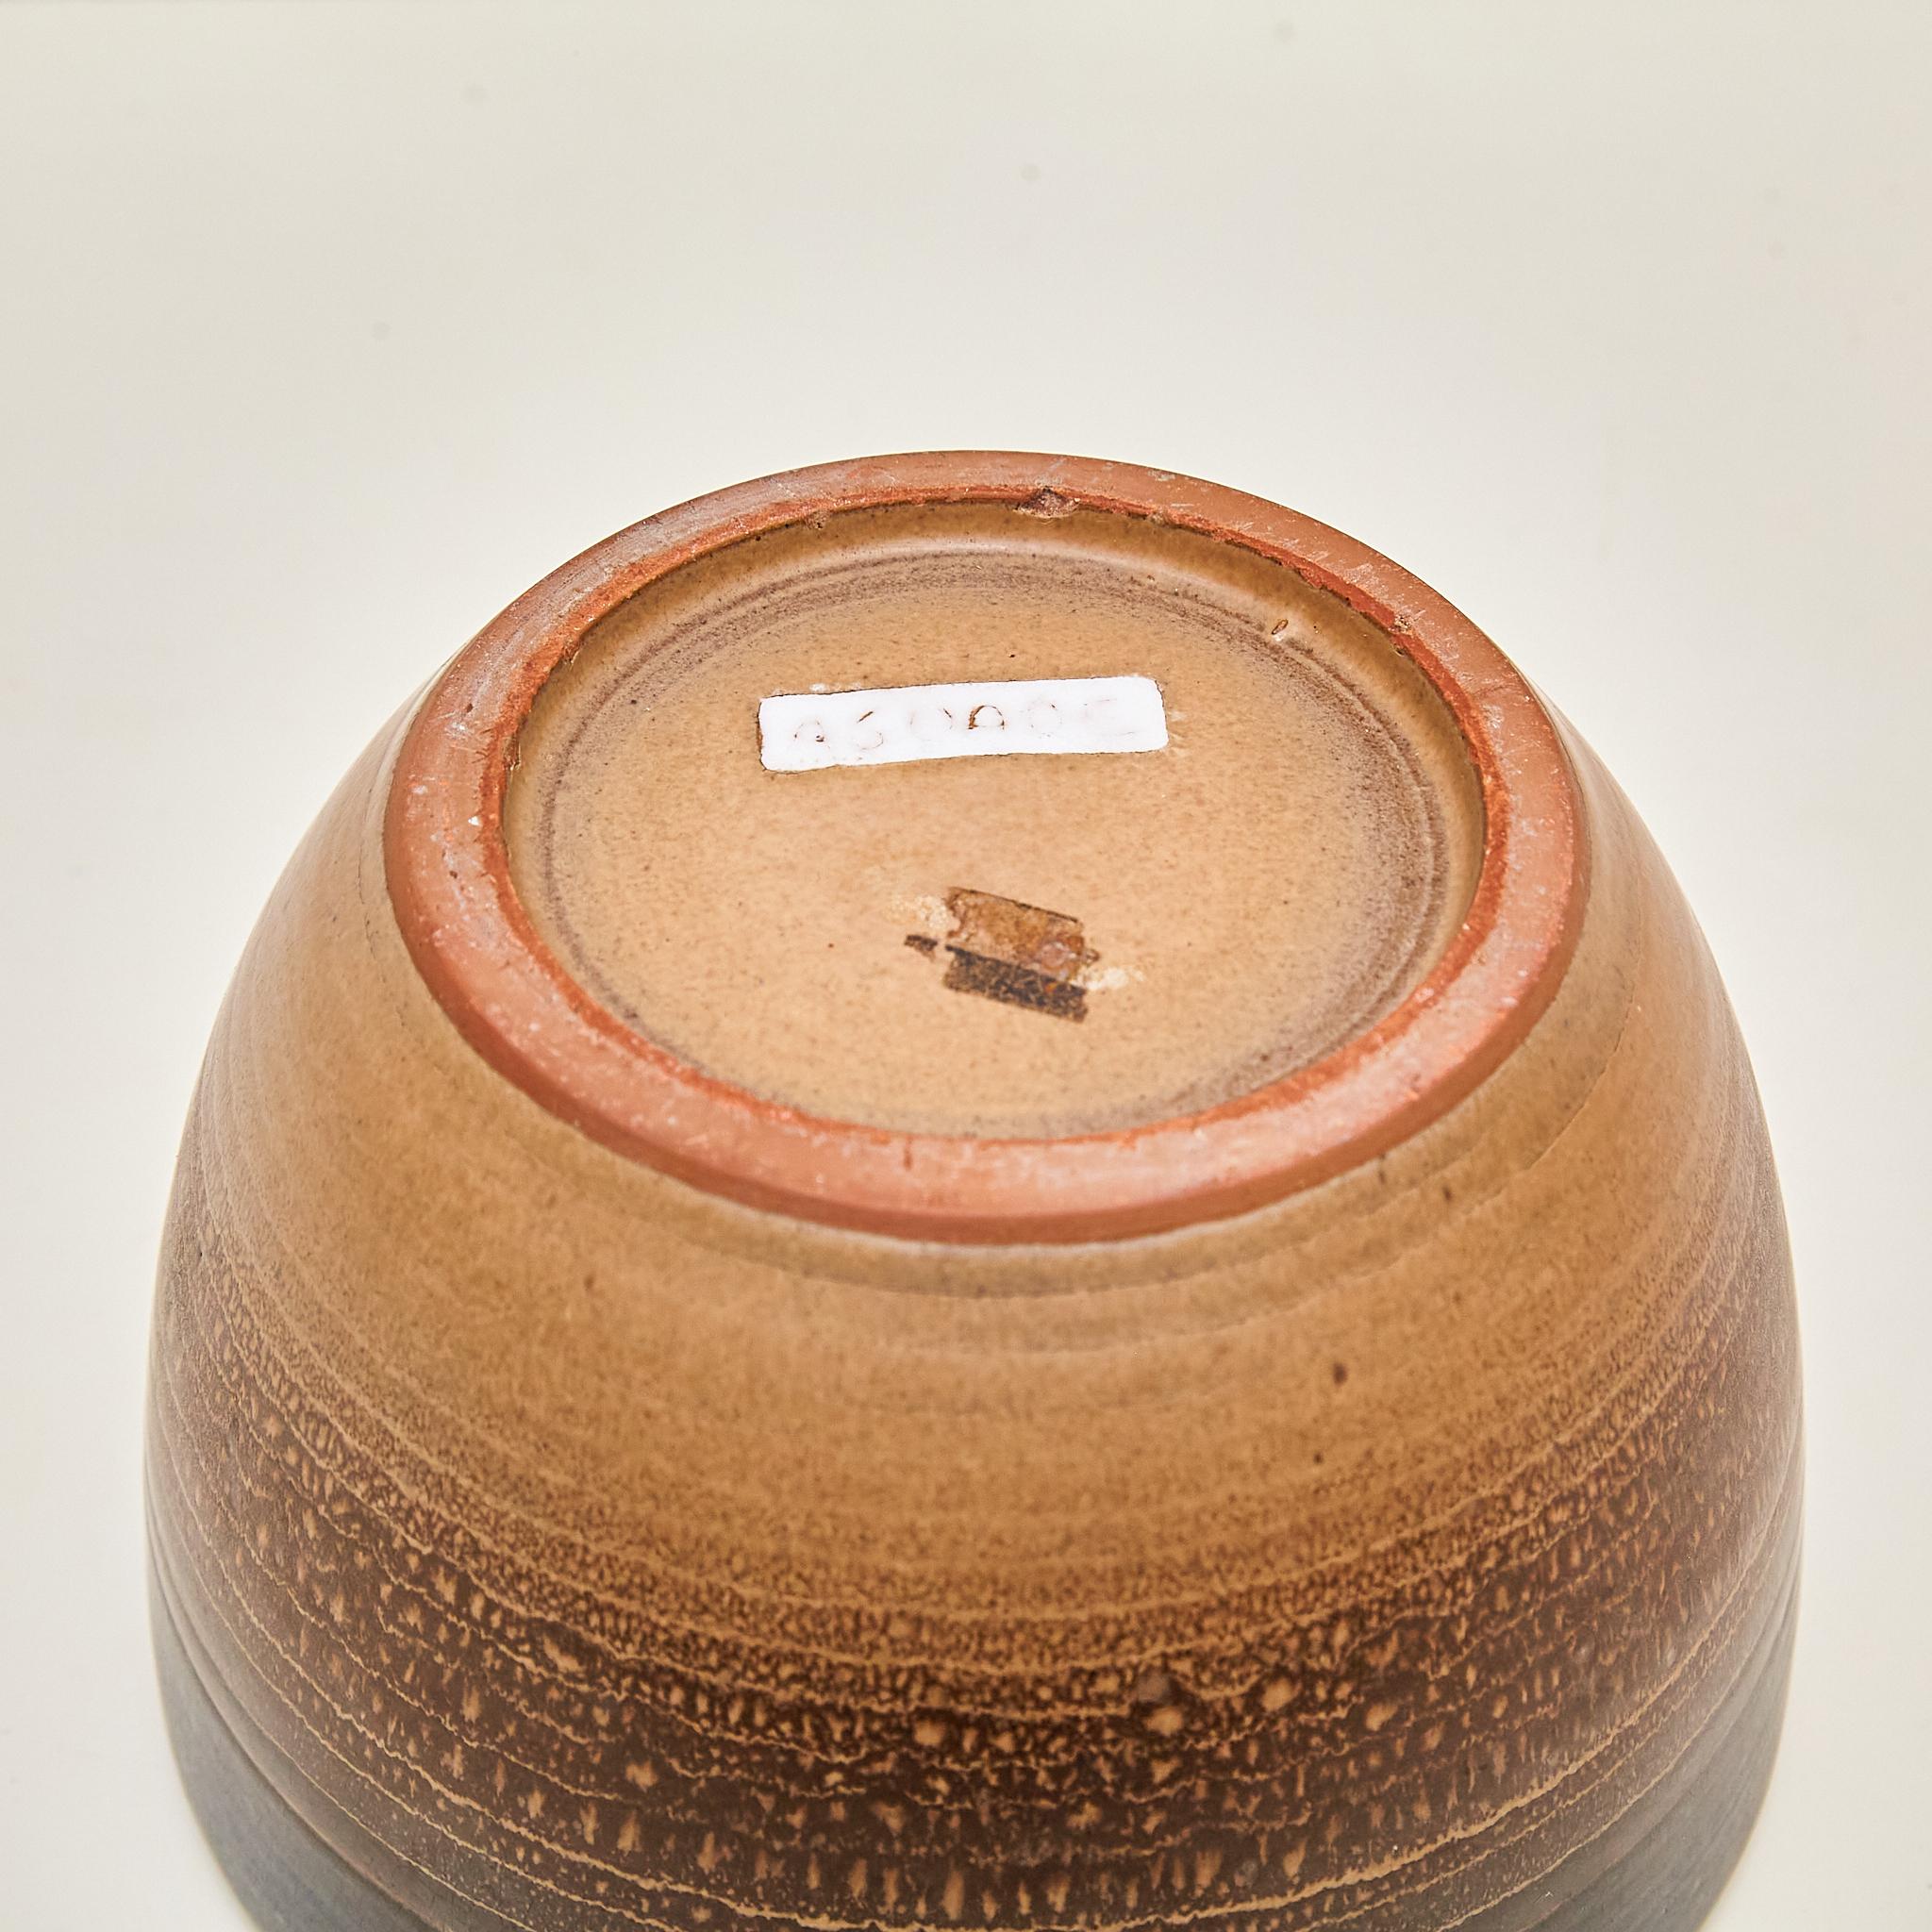 Mid-20th Century Artistry in Clay: Jordi Aguadé's Signed Ceramic Base from 1960 For Sale